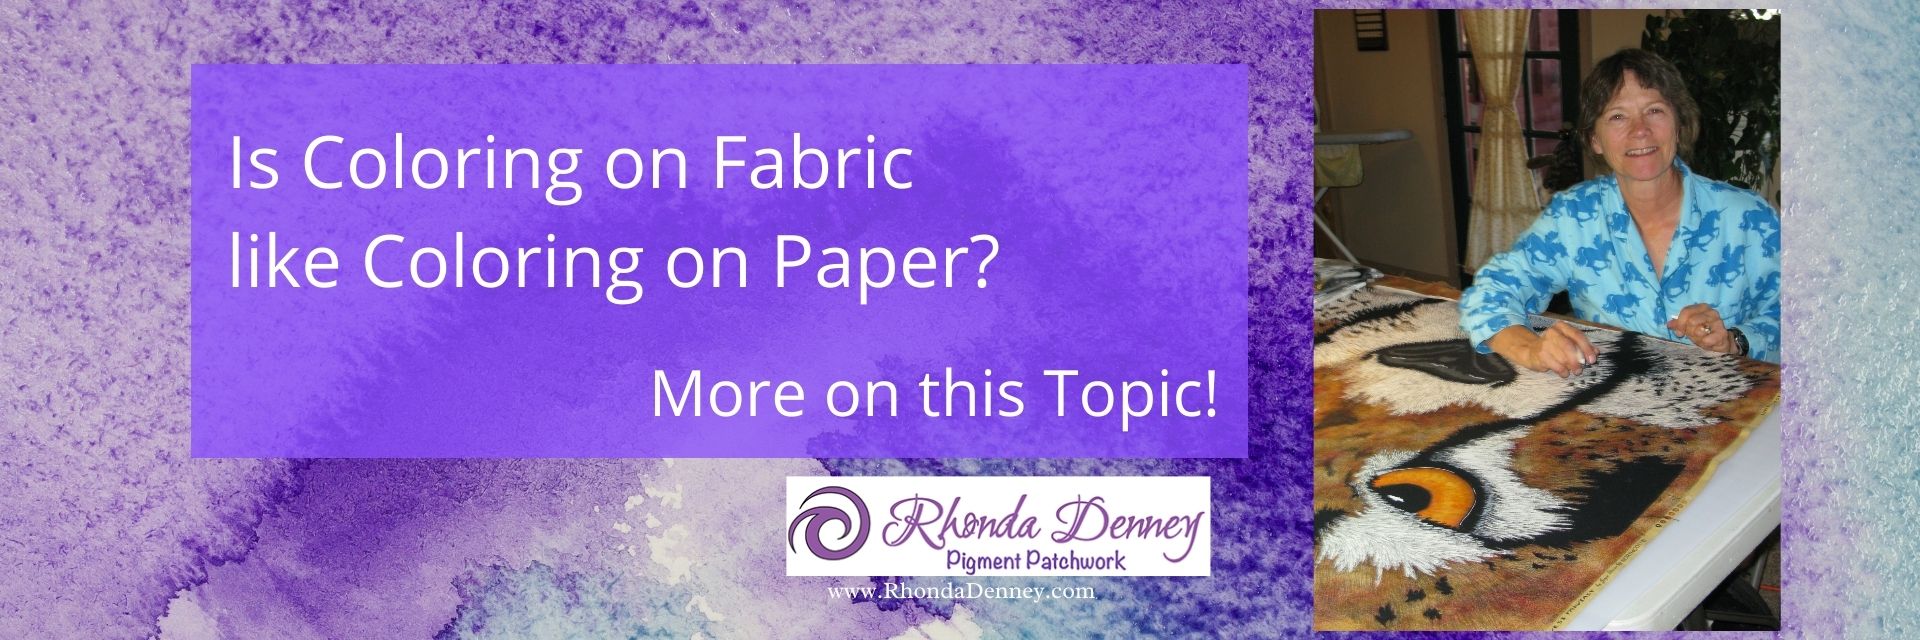 Rhonda Denney - Is Coloring on Fabric like Coloring on Paper?